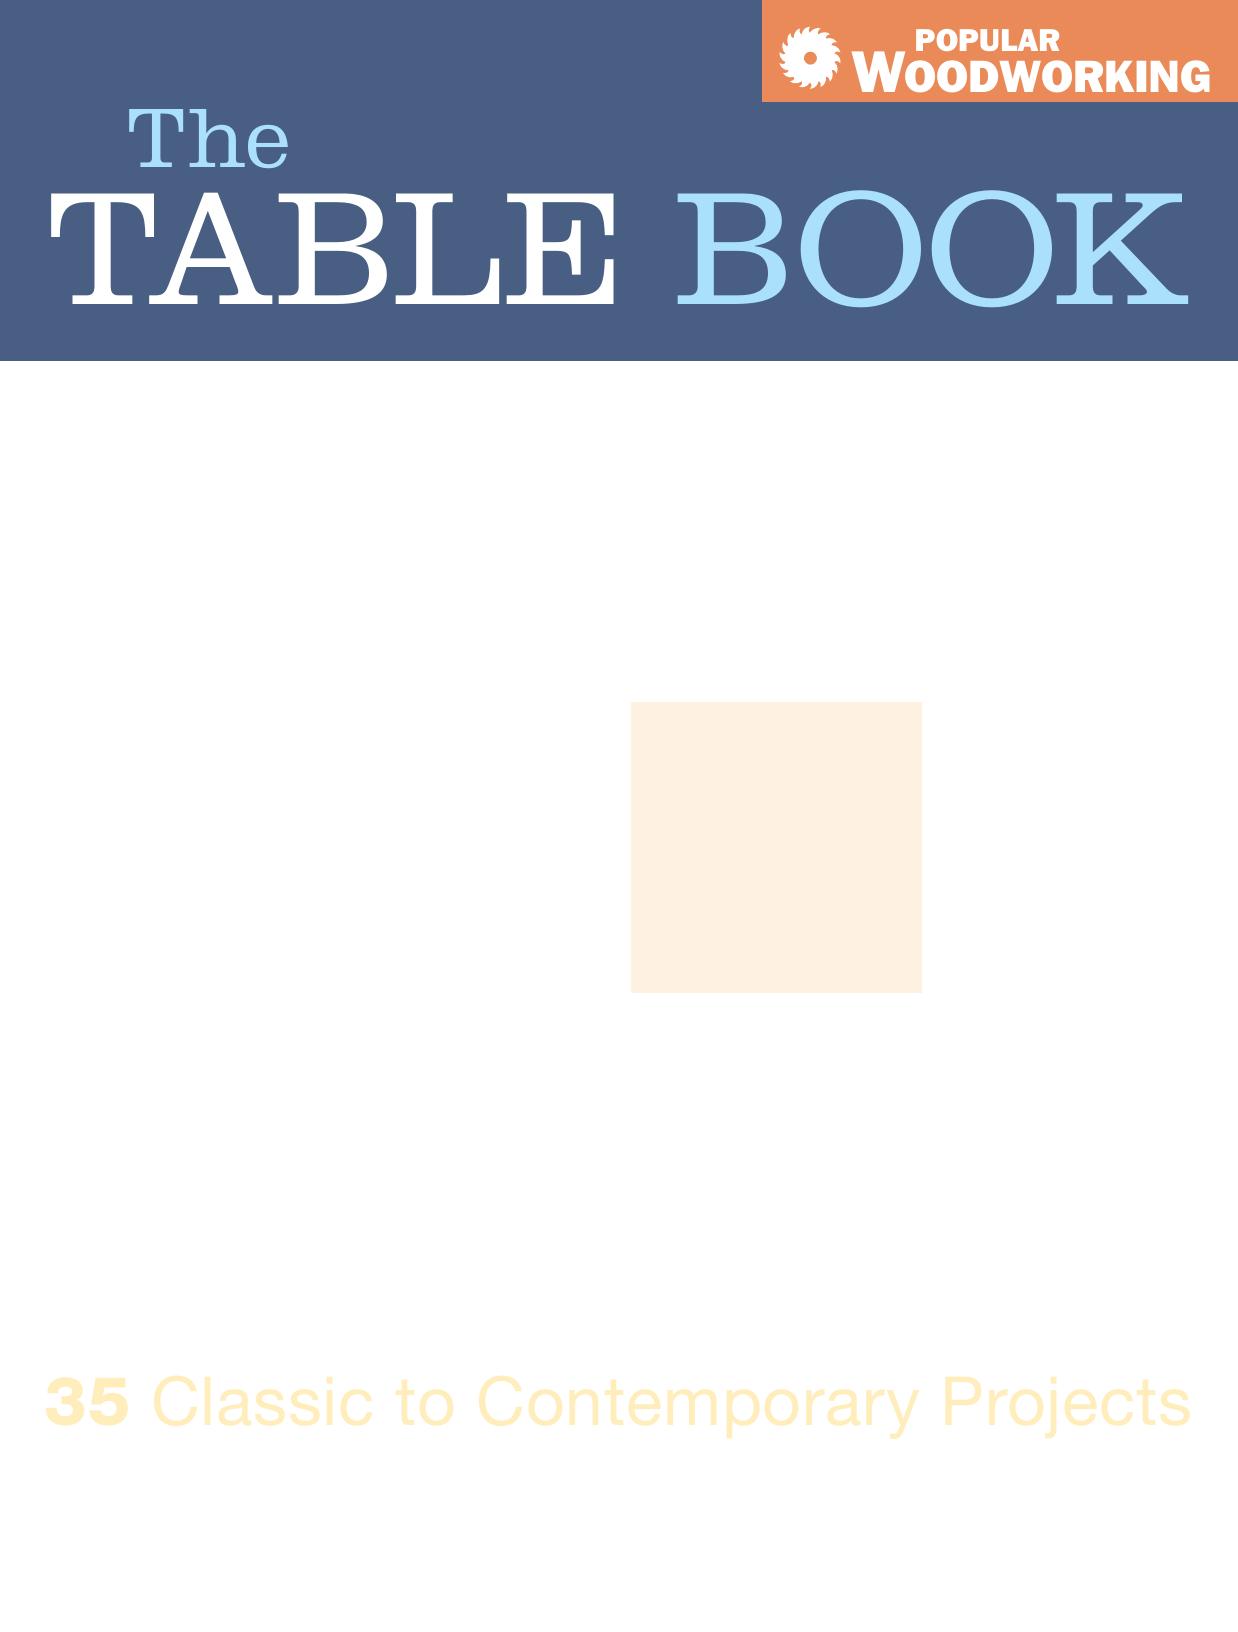 The Table Book by Editors of Popular Woodworking